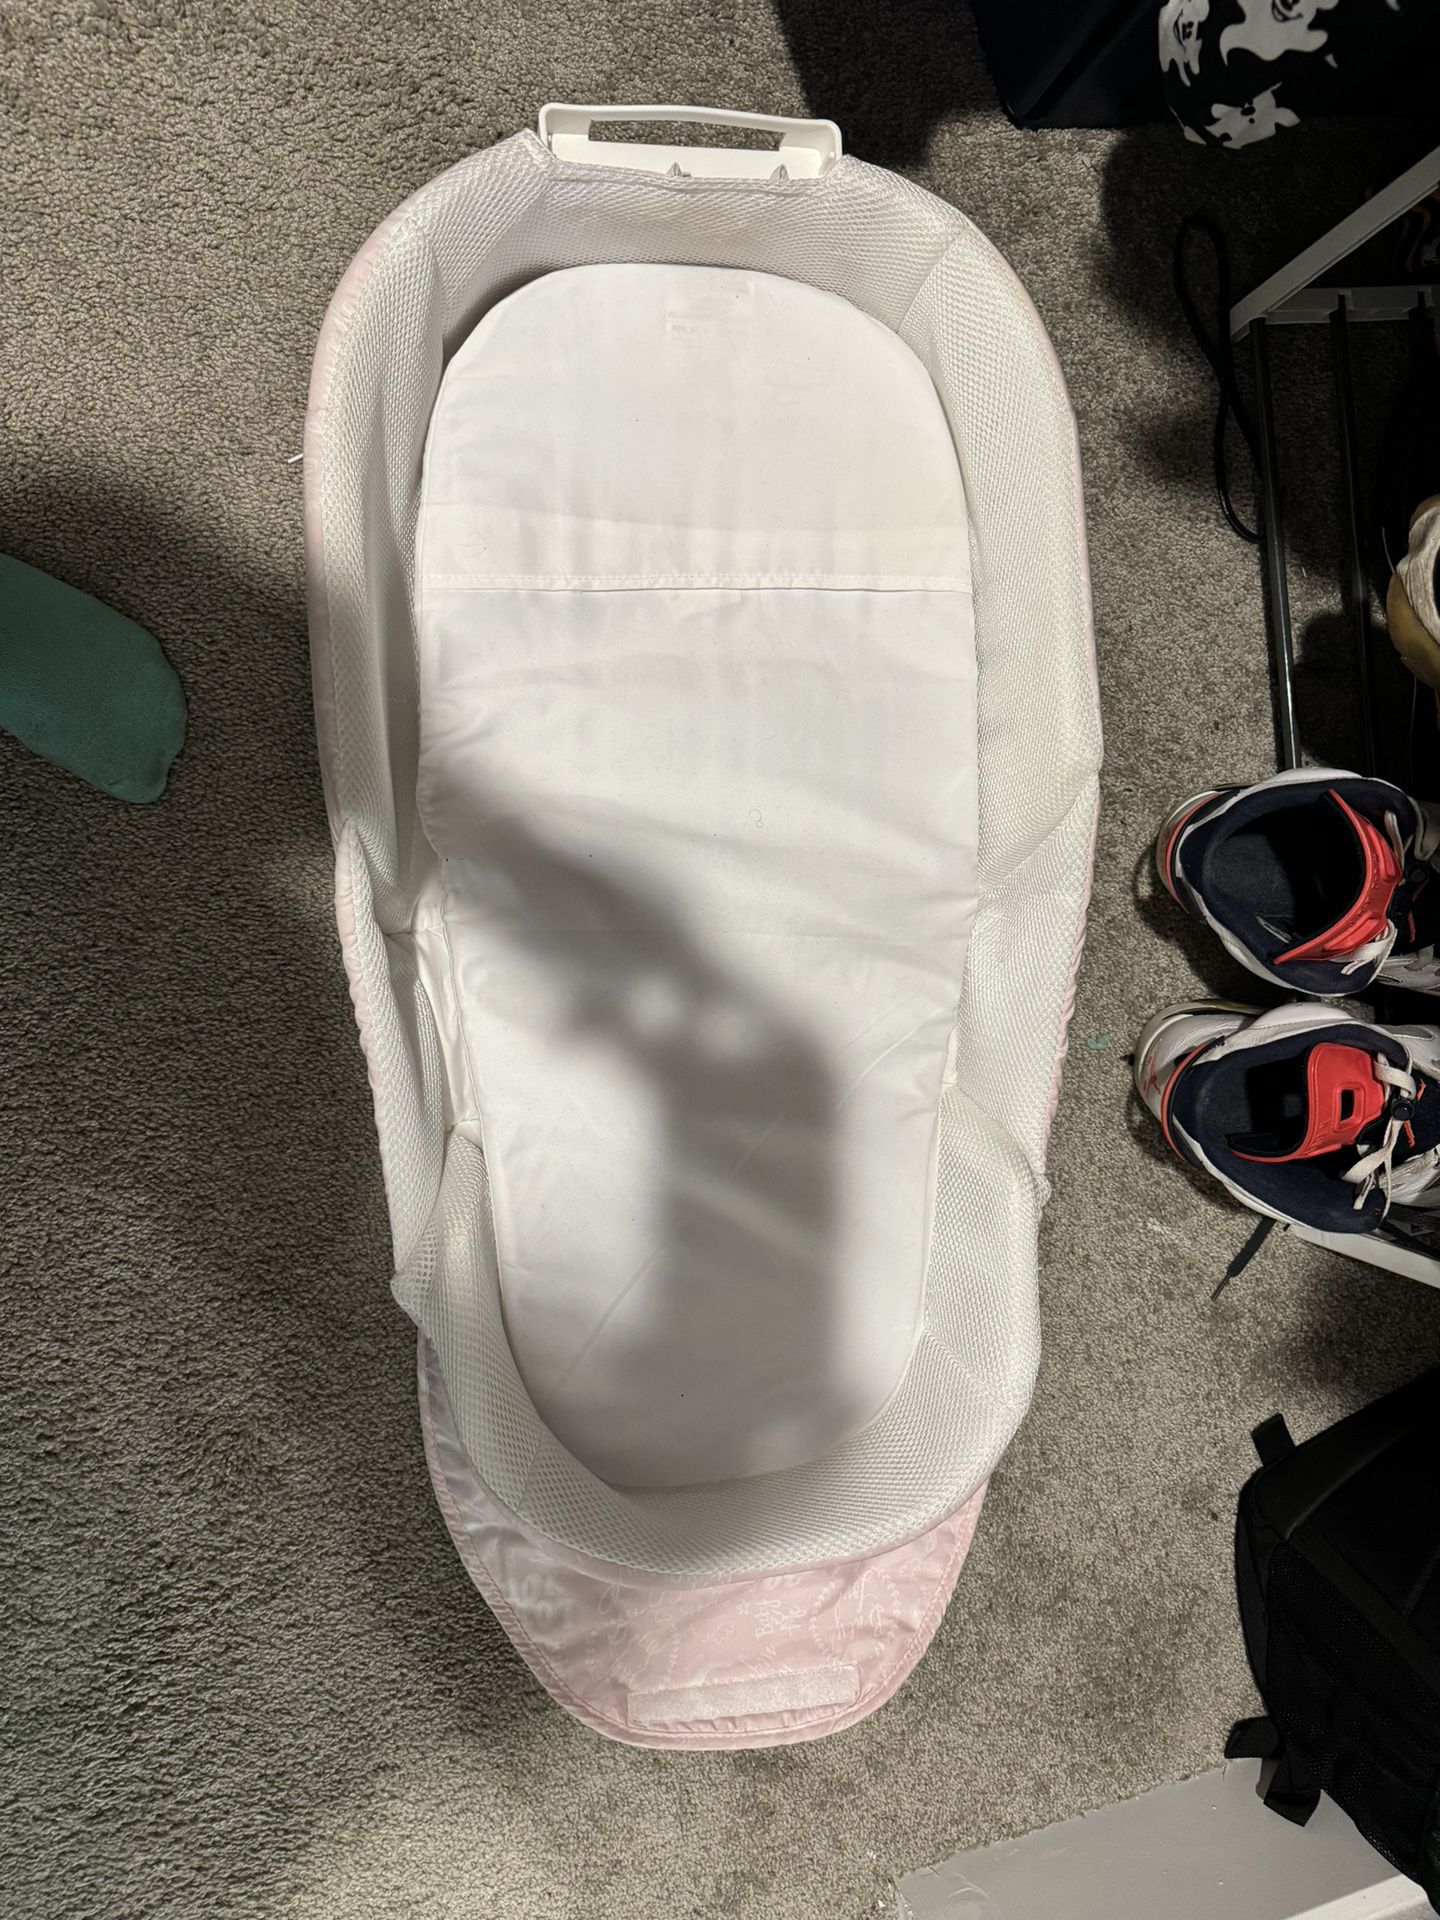 Portable Baby Bedside 